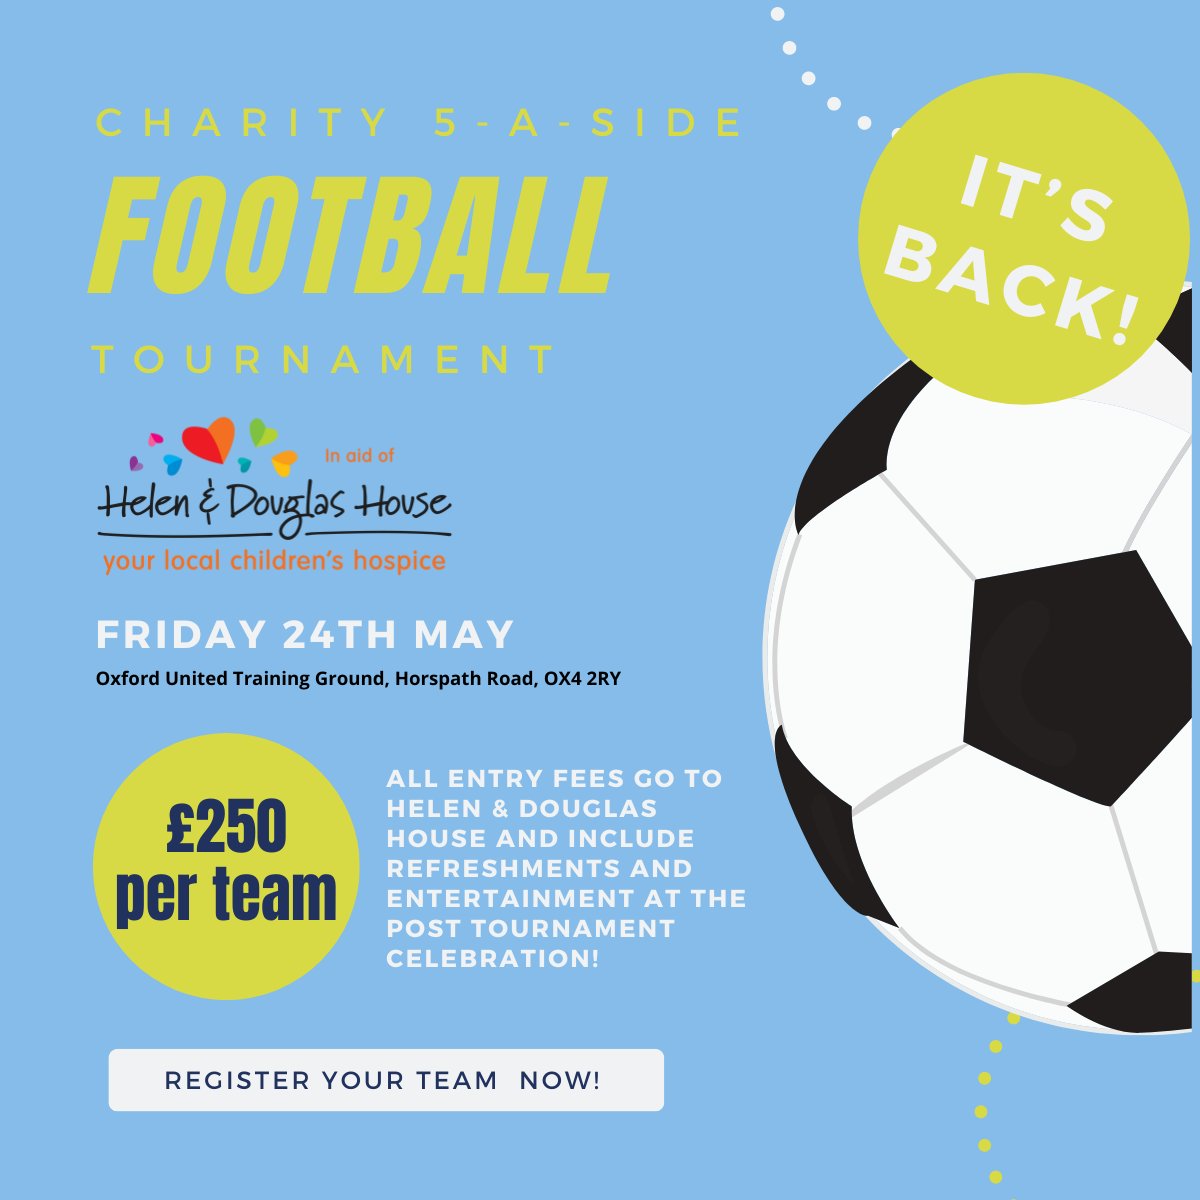 Our fun 5-a-side charity football tournament in aid of @HelenAndDouglas is back on May 24th! If you'd like to enter a team fill out our form to bag one of the final remaining places. 
forms.office.com/Pages/Response…
#carehomes #carehomesuk